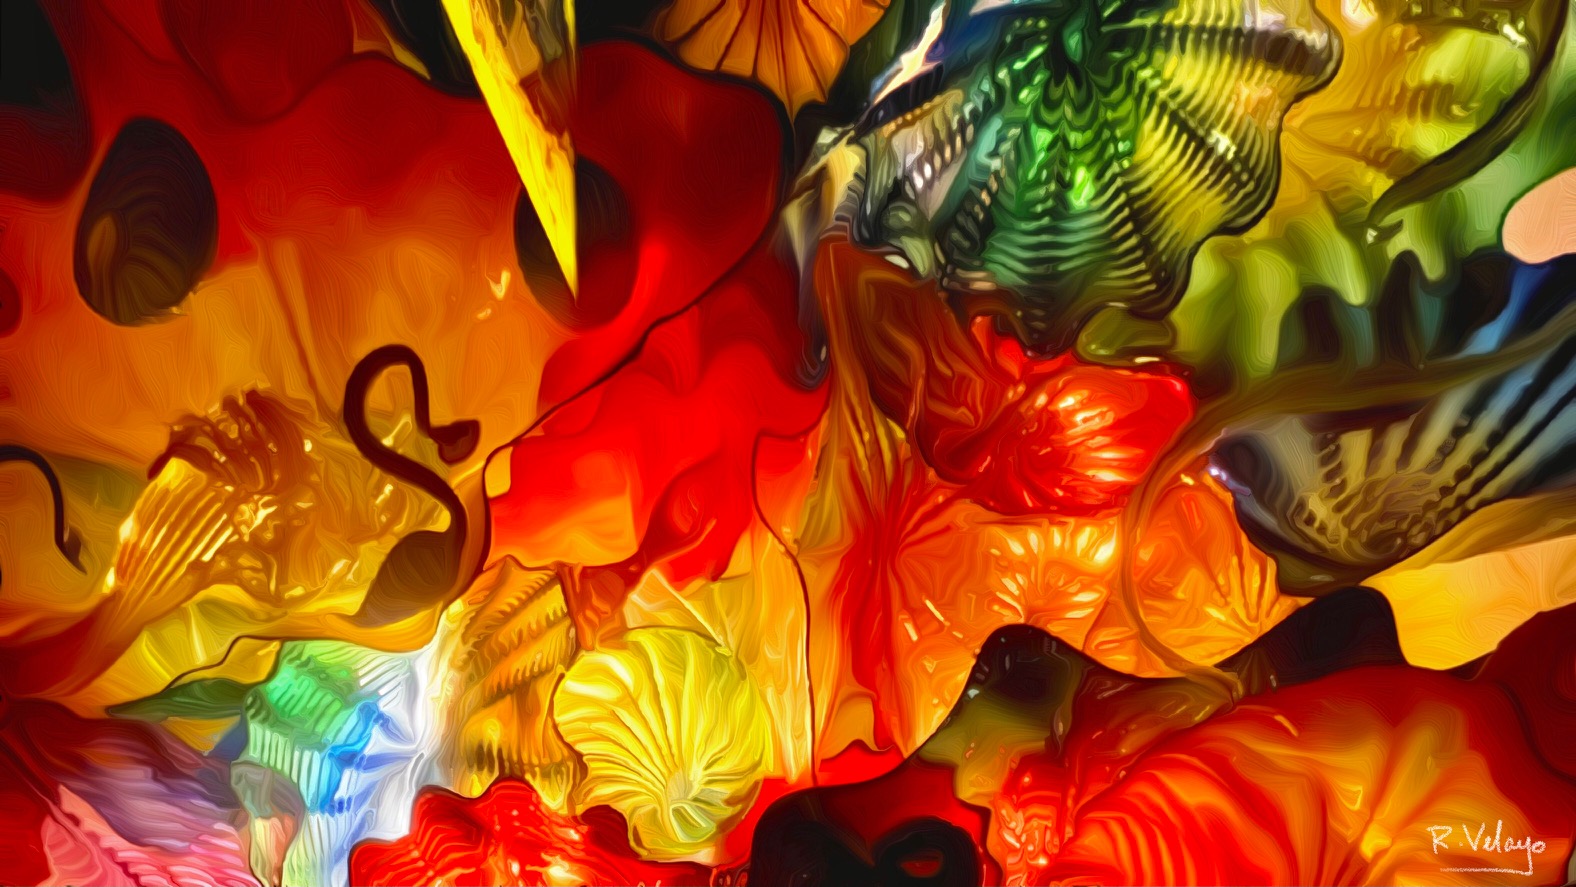 "CHIHULY COLLECTION 2" [Created: 8/05/2022]